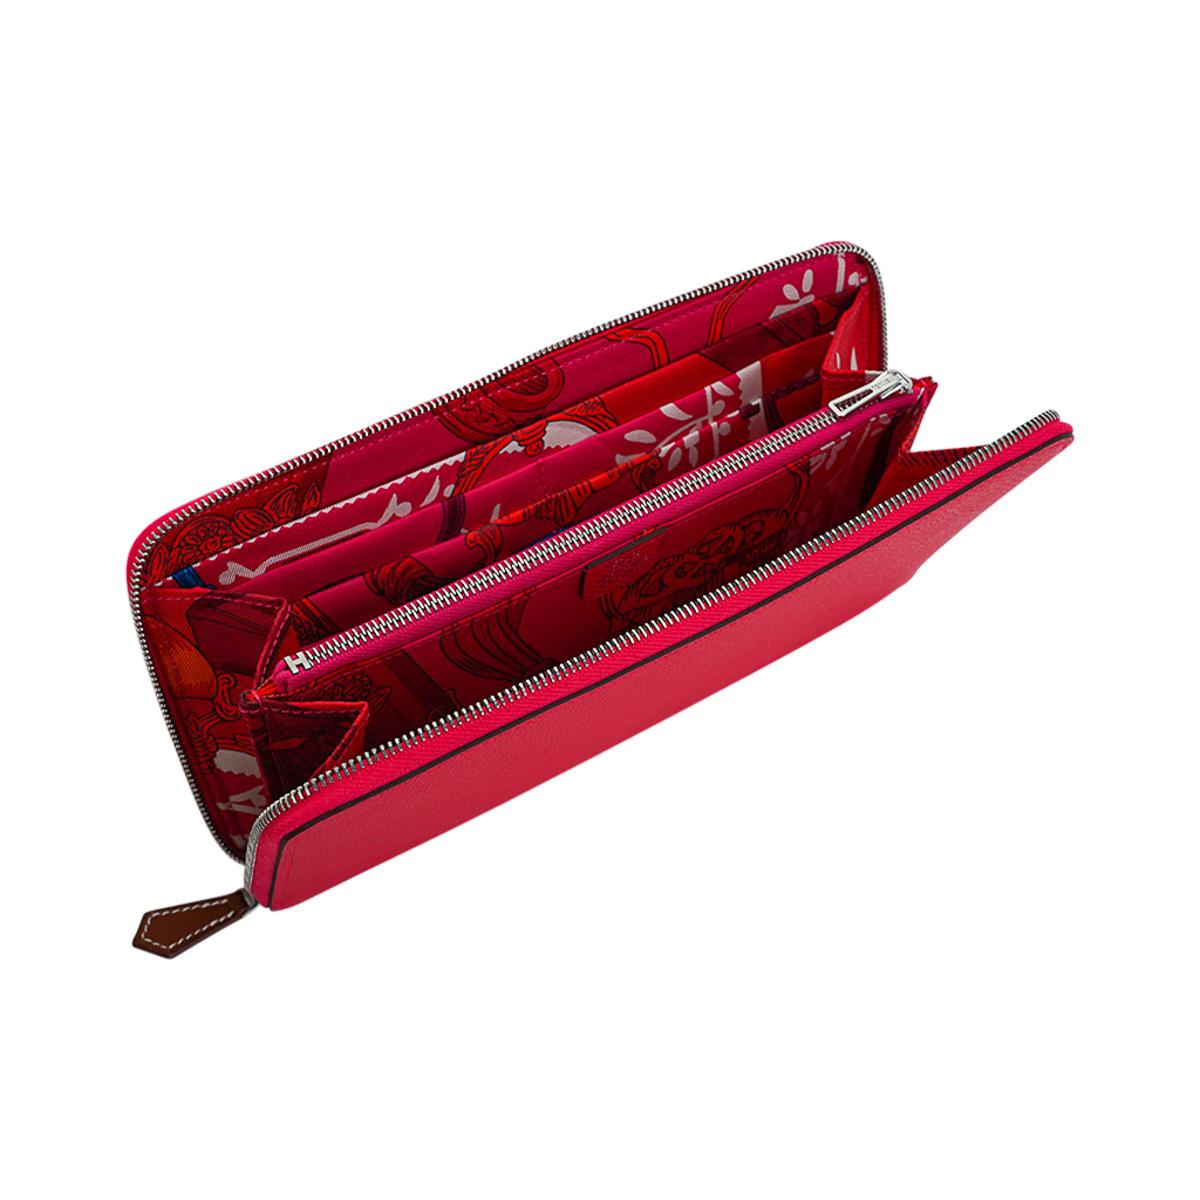 Mightychic offers an Hermes Silk' In Classique long wallet featured in richly saturated Rose Extreme.
Rose Mexico silk scarf print interior.
Beautiful in Epsom leather and palladium hardware with Barenia leather zipper pull.
Interior has a divided